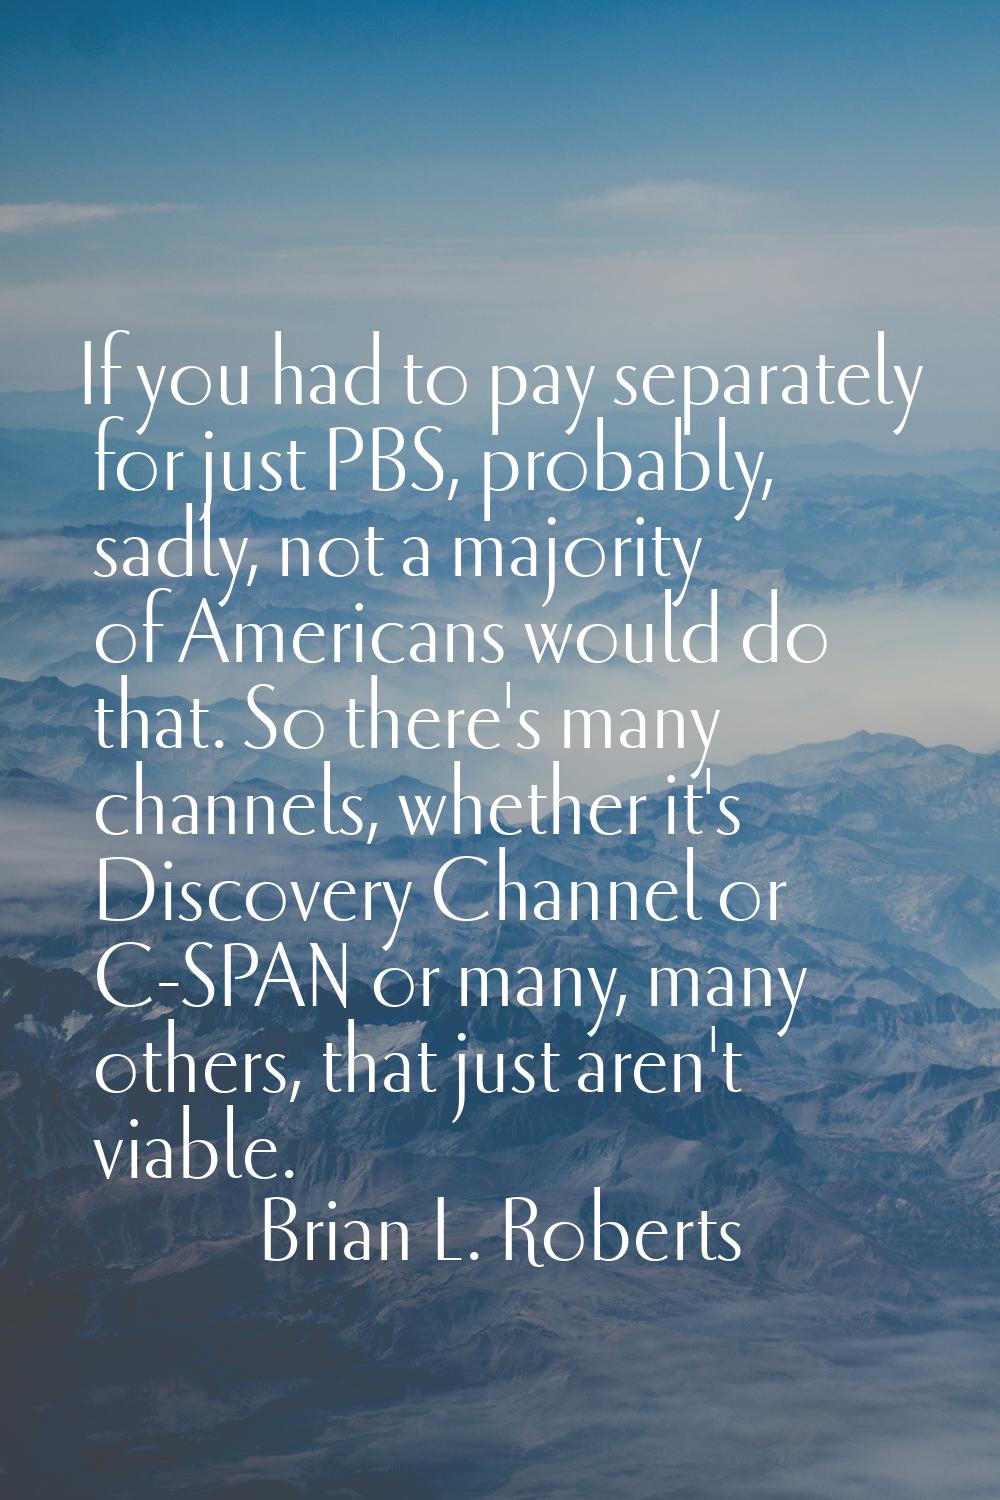 If you had to pay separately for just PBS, probably, sadly, not a majority of Americans would do th